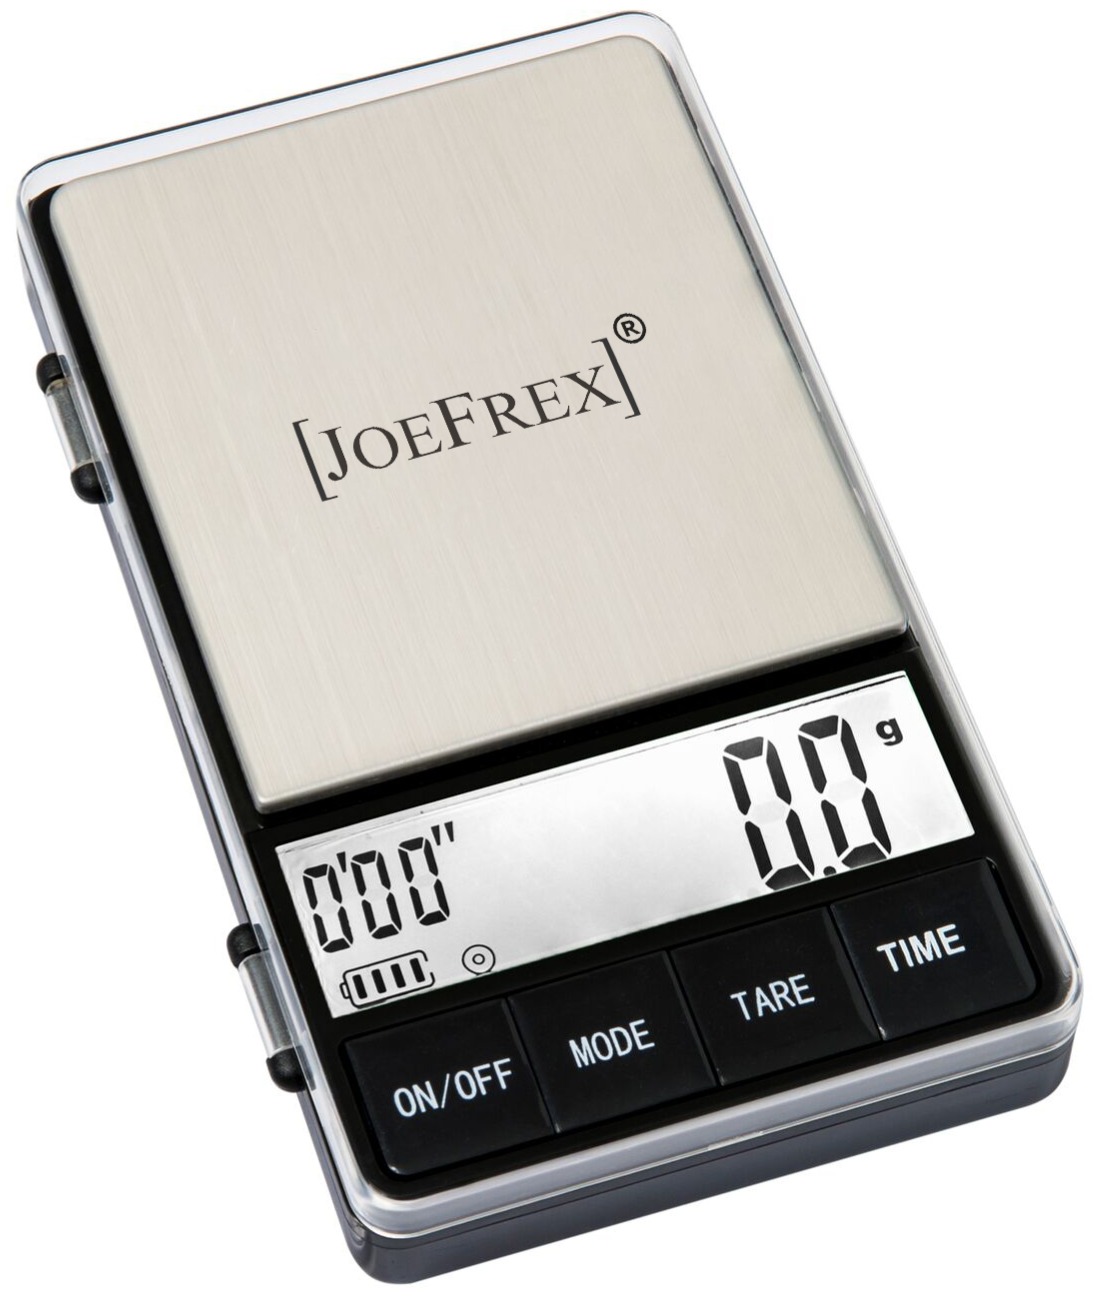 https://www.cremashop.eu/content/products/joefrex/digital-coffee-scale-with-timer/3492.jpg